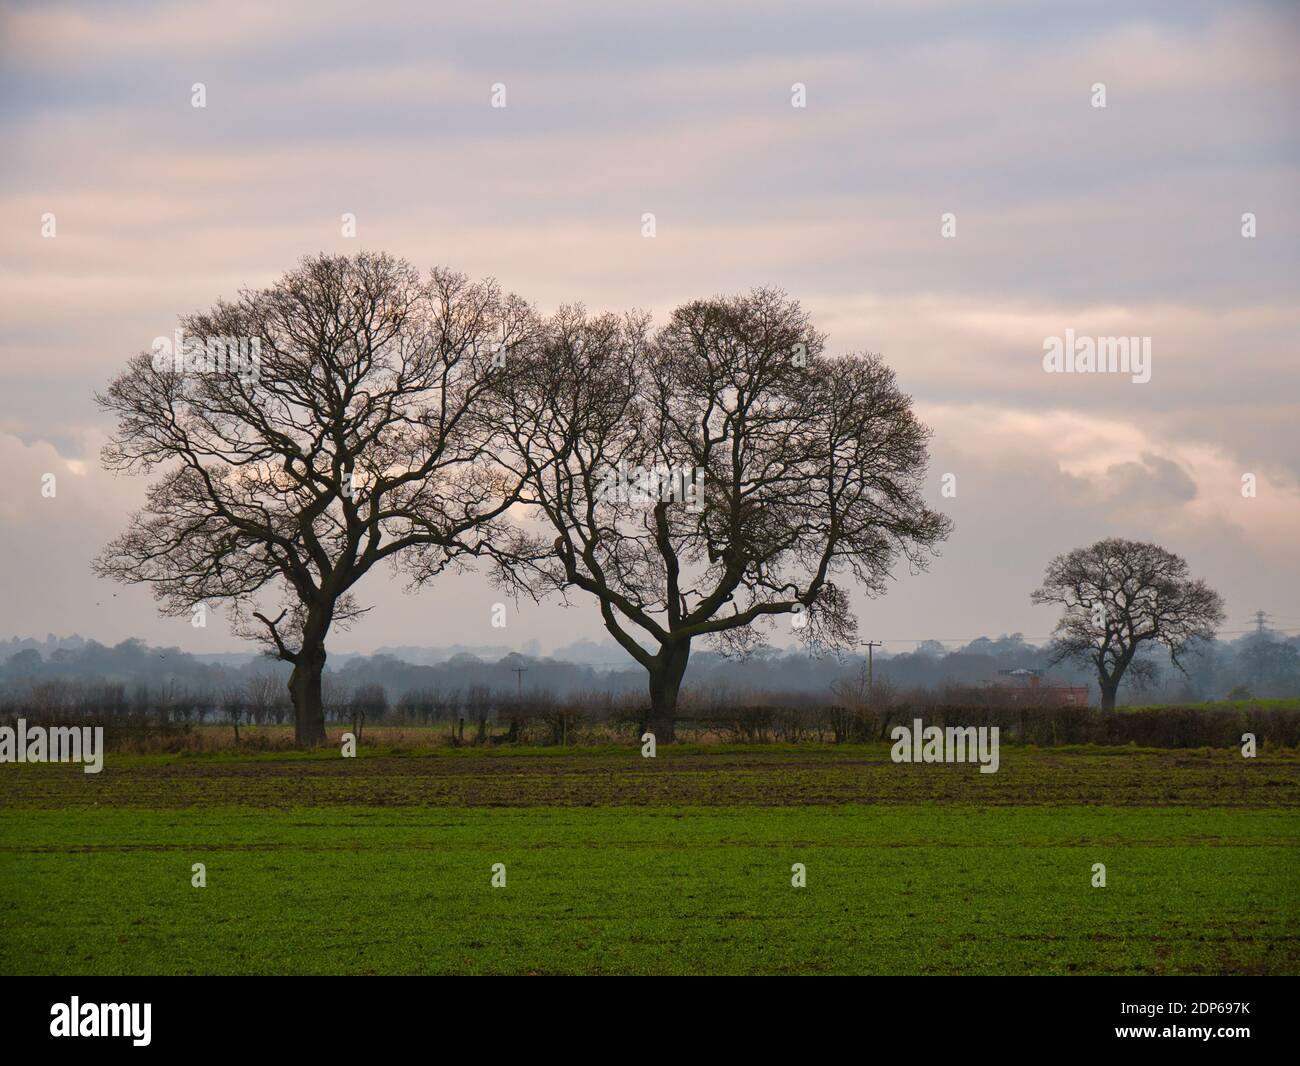 Arable farmland and silhouetted leafless trees at dusk at the end of a cold winter day with mist forming. Taken in Cheshire, England, UK. Stock Photo